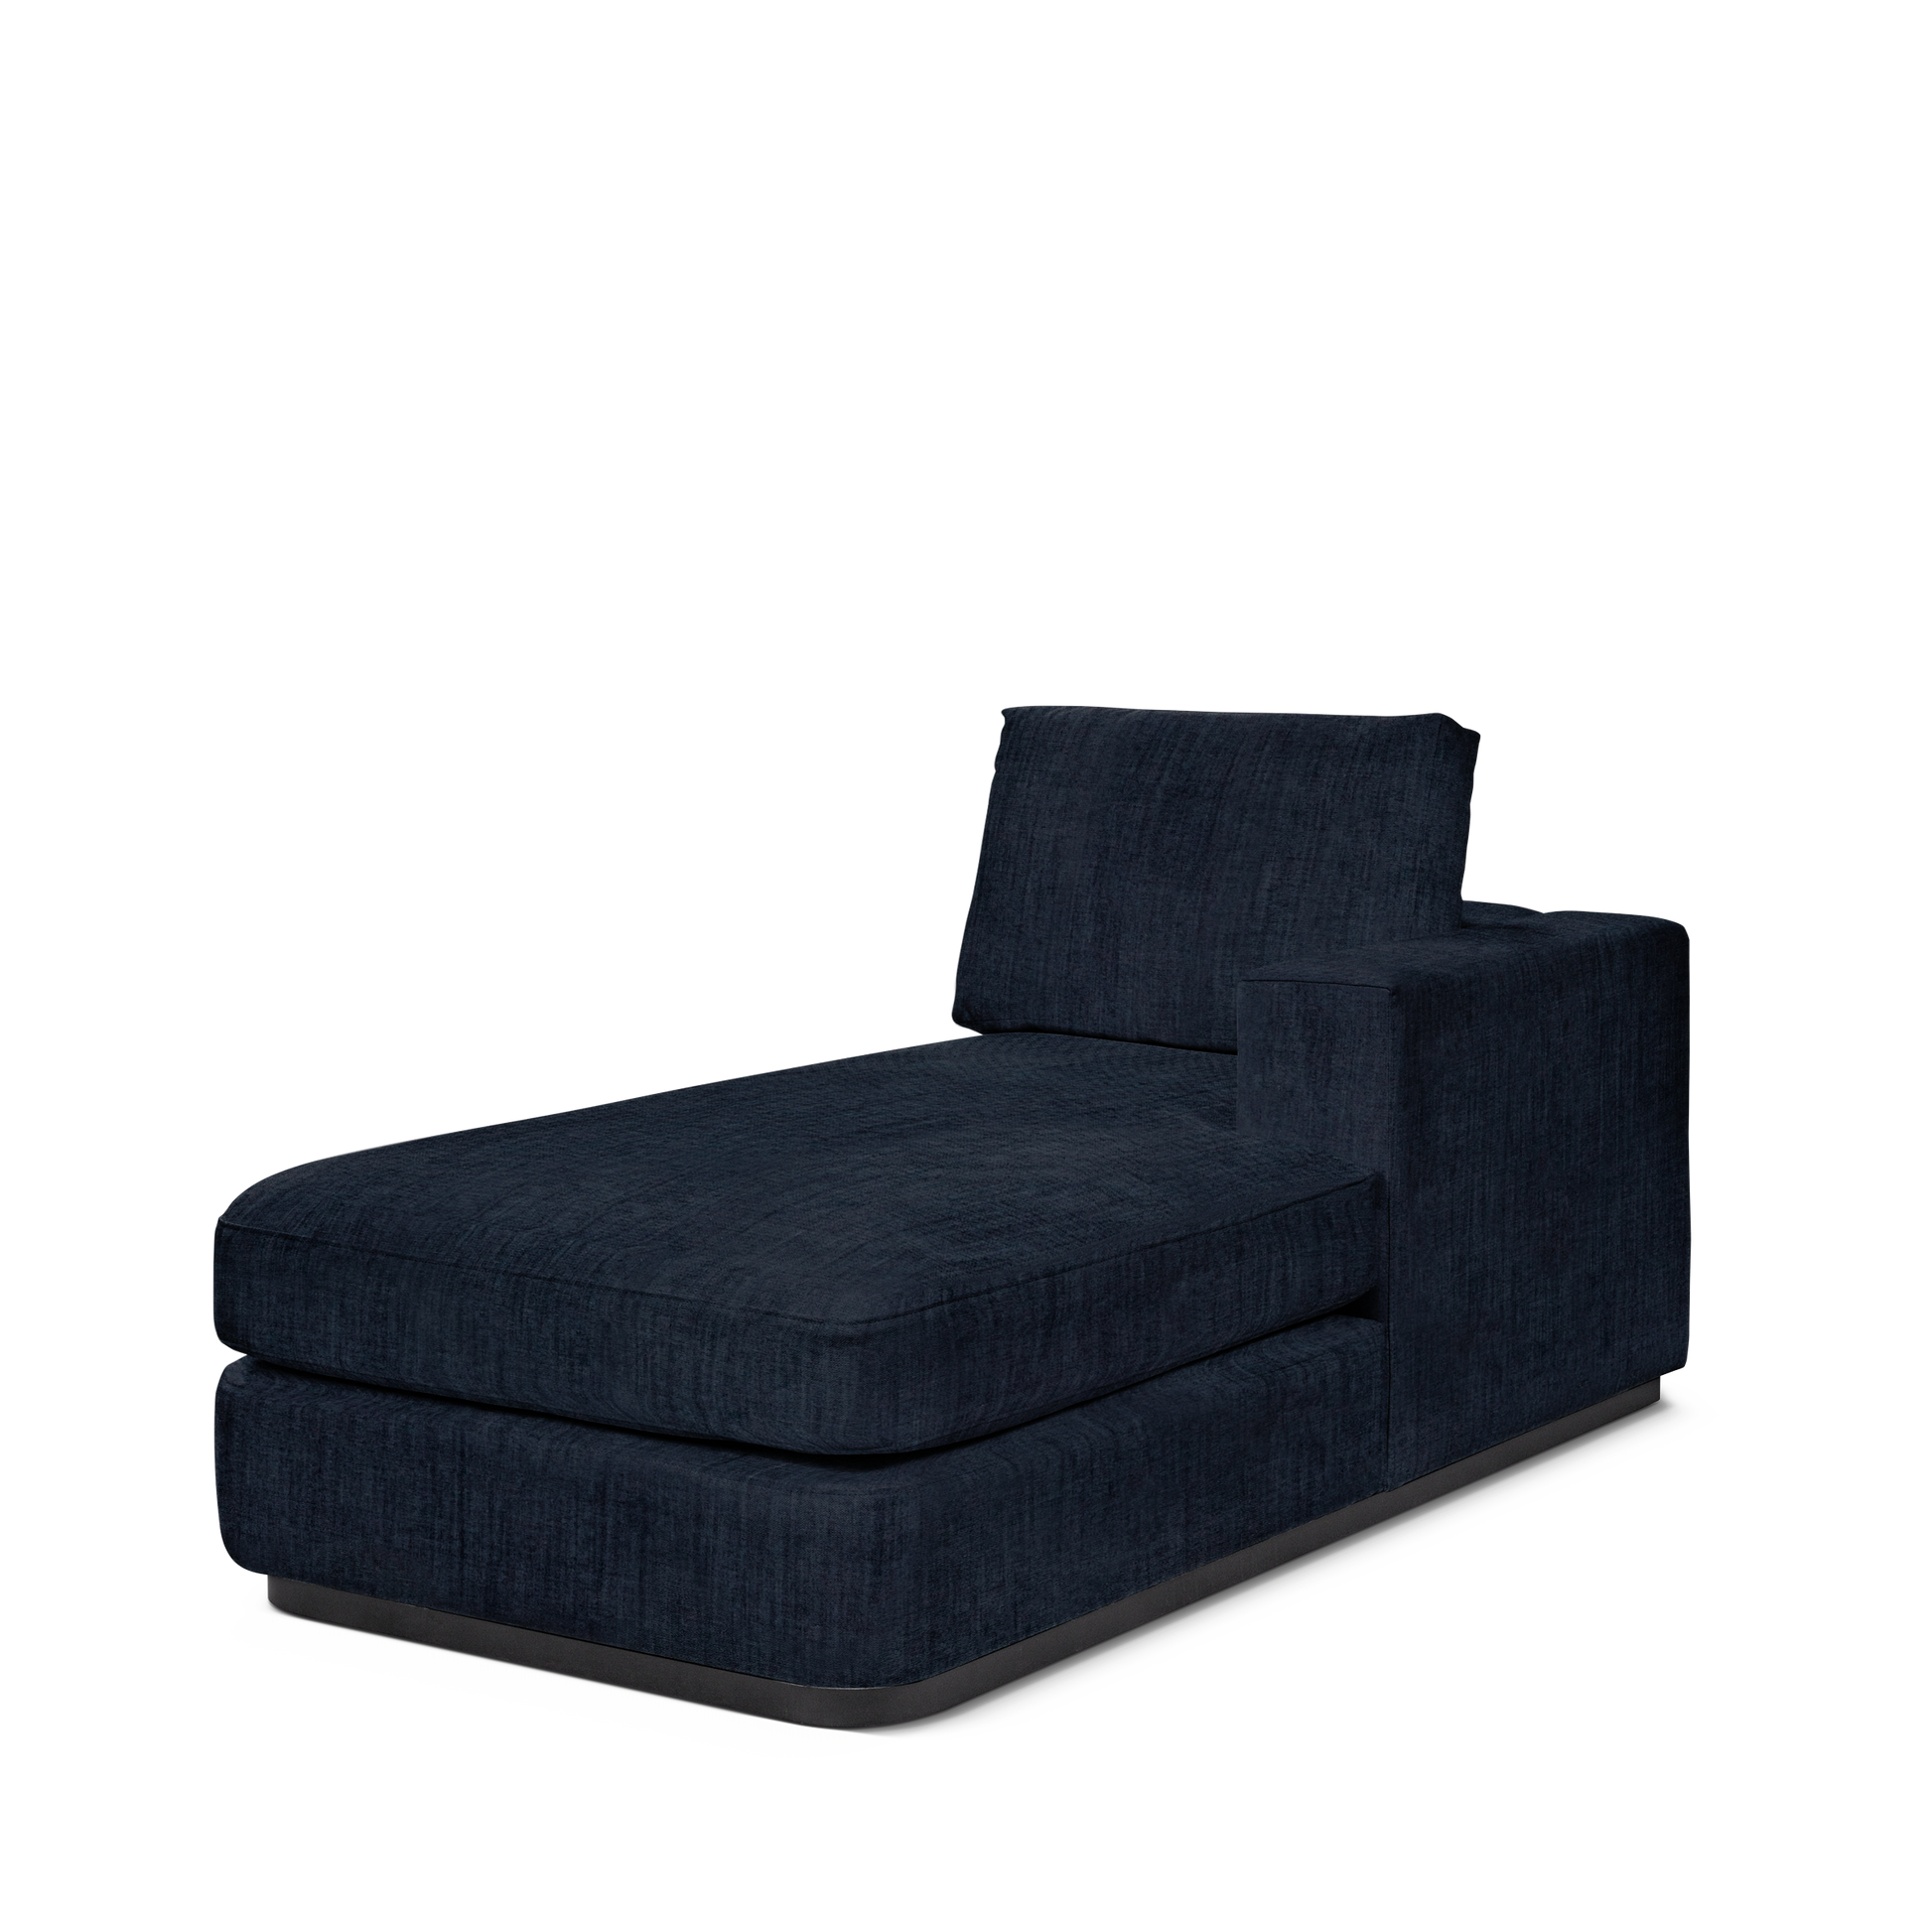 ATLAS 90 Lounge Bed arm rest right with dark blue textile